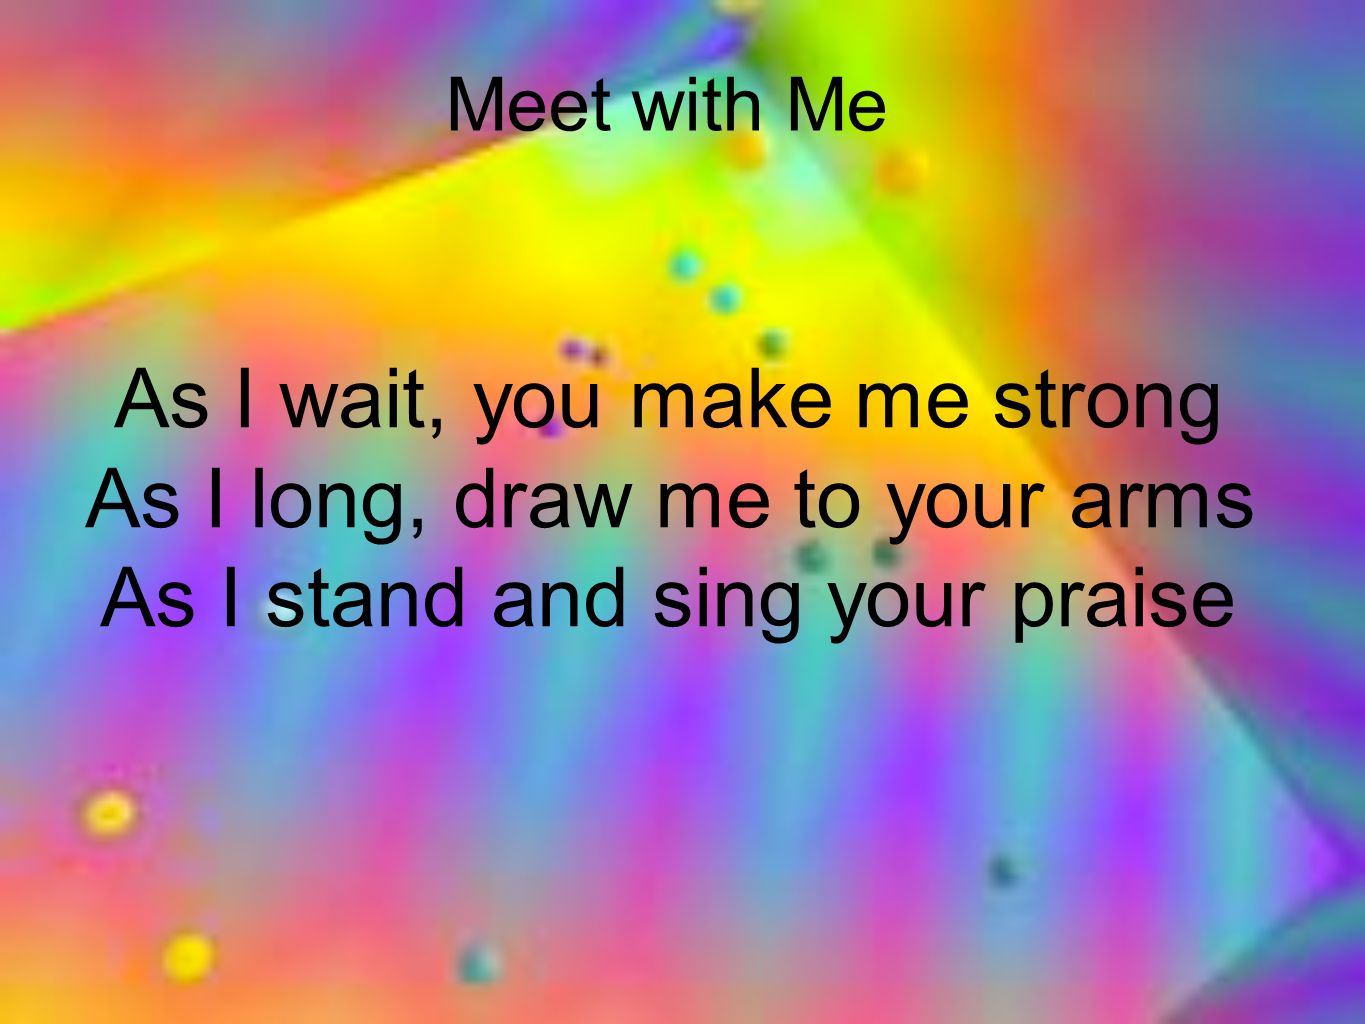 As I wait, you make me strong As I long, draw me to your arms